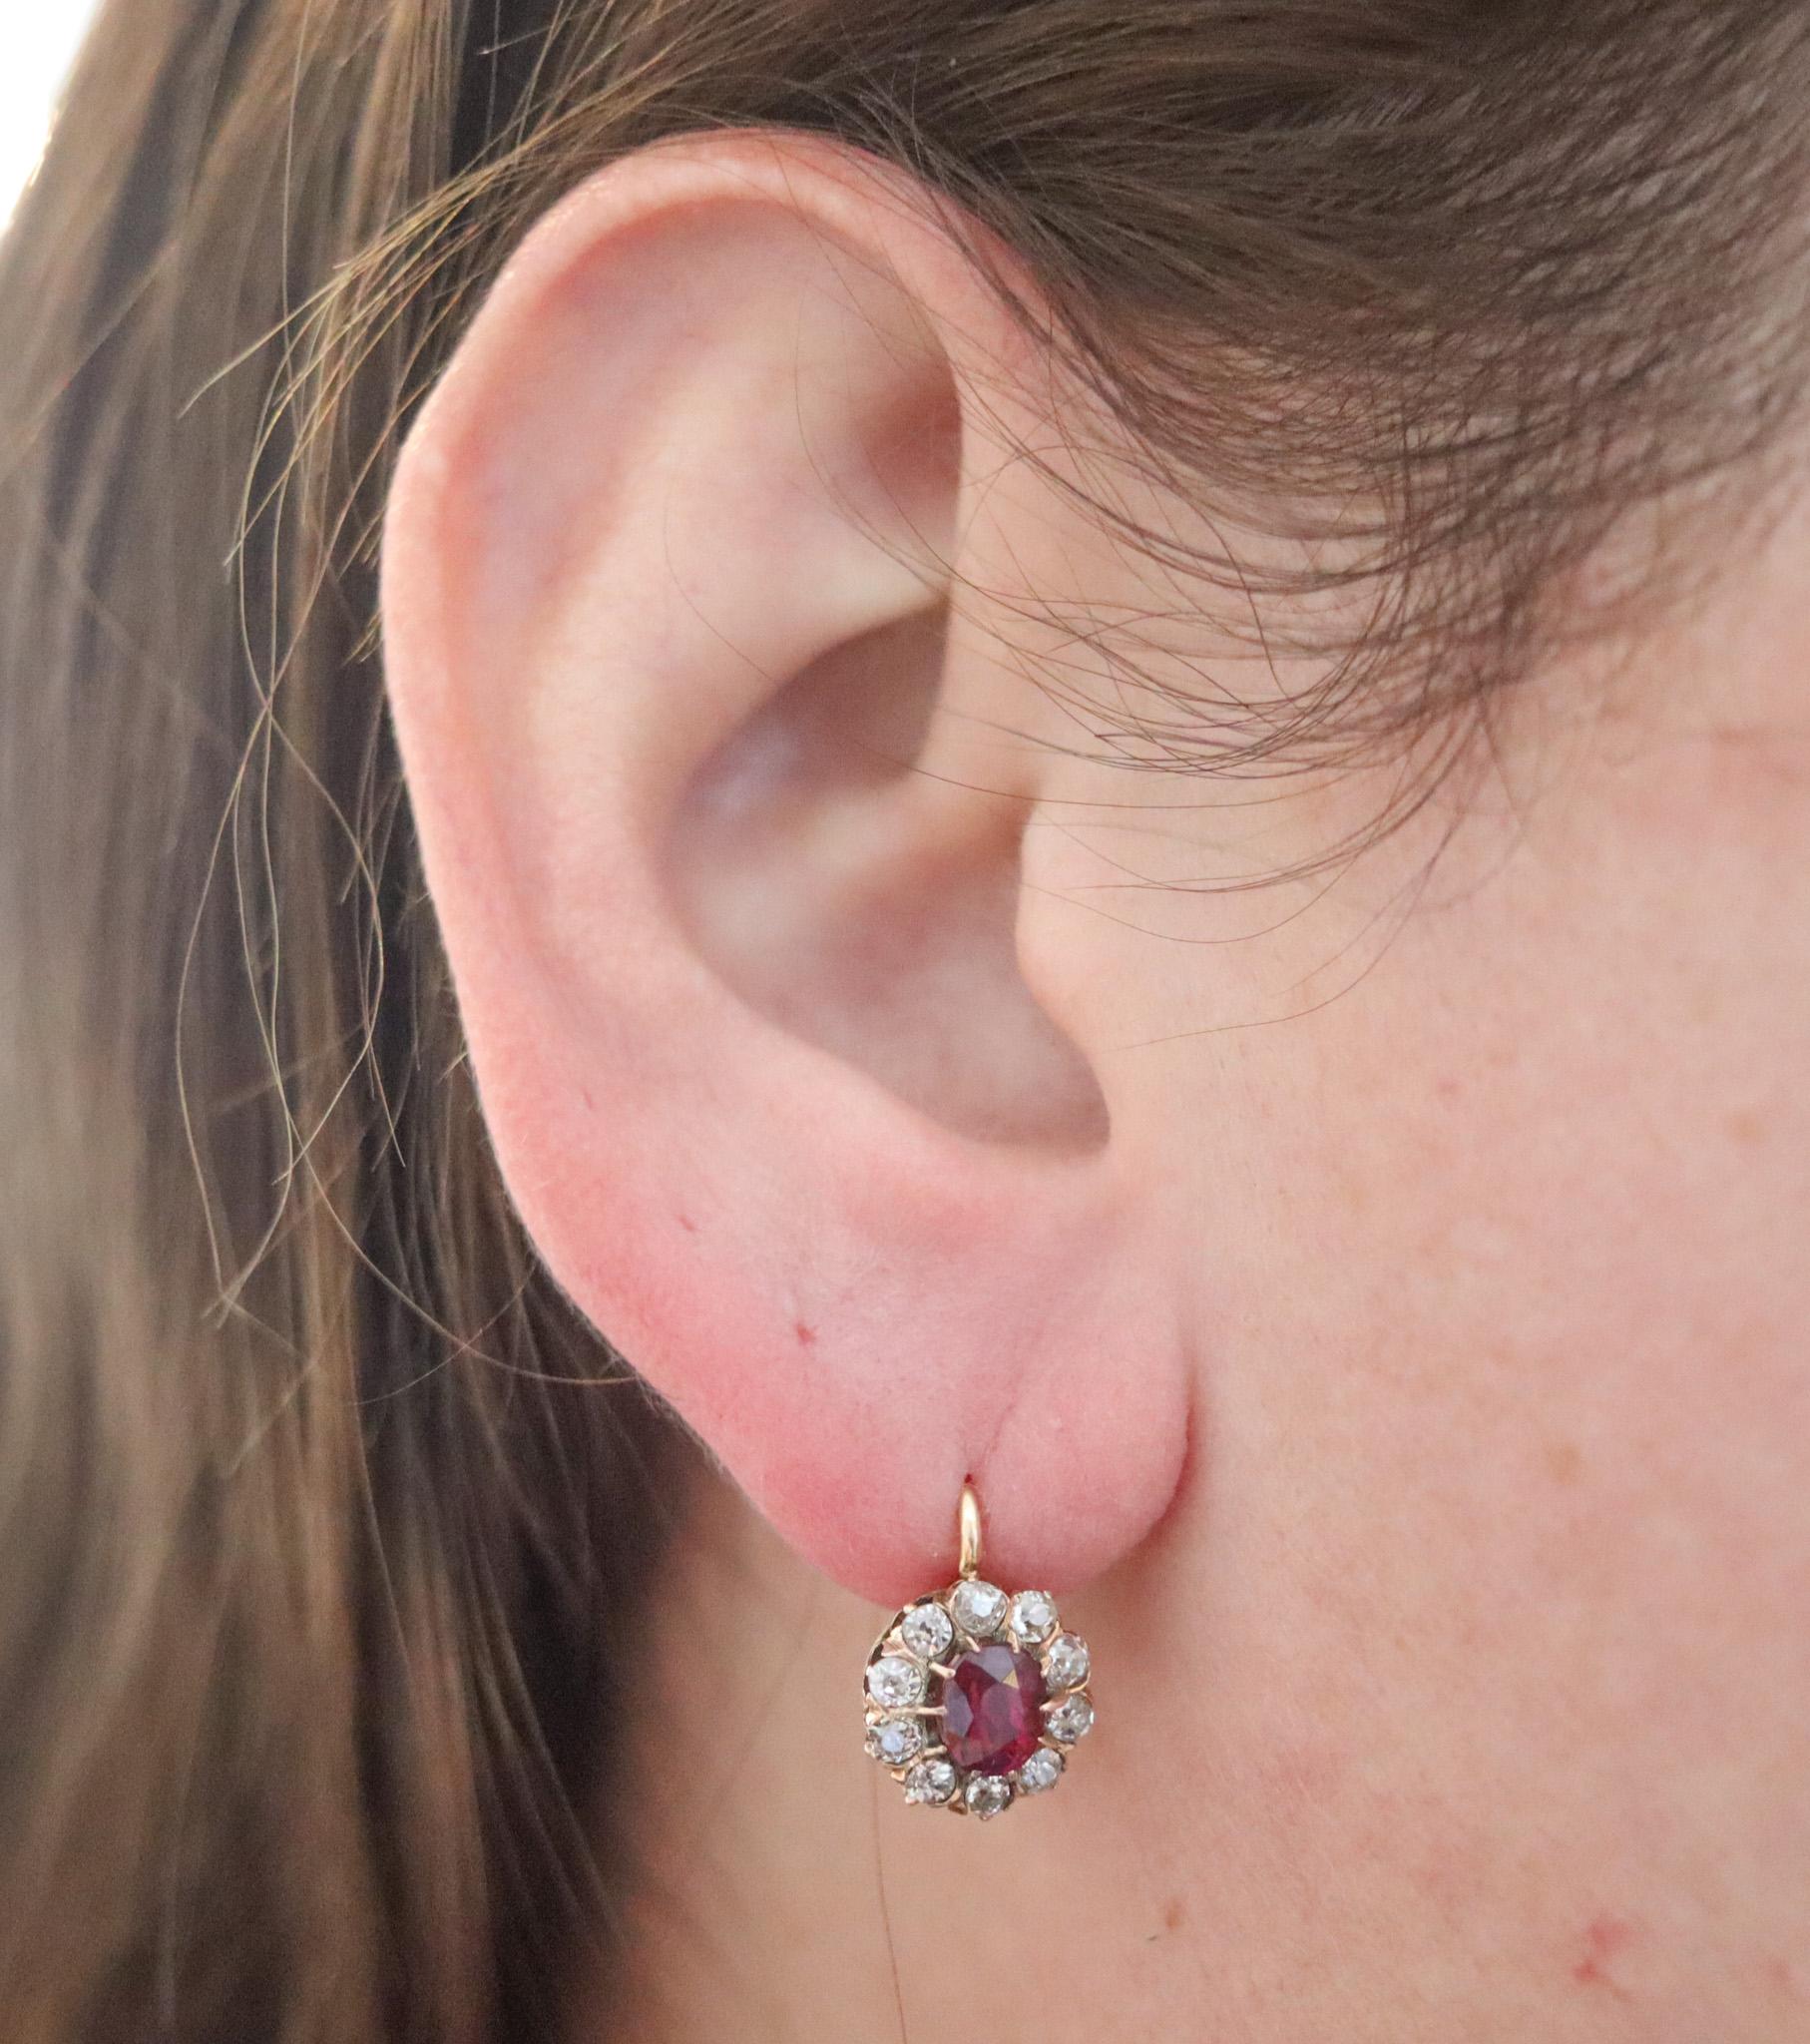 Edwardian 1905 Antique French Earrings 18Kt Gold With 3.54 Ctw Diamonds & Rubies For Sale 1